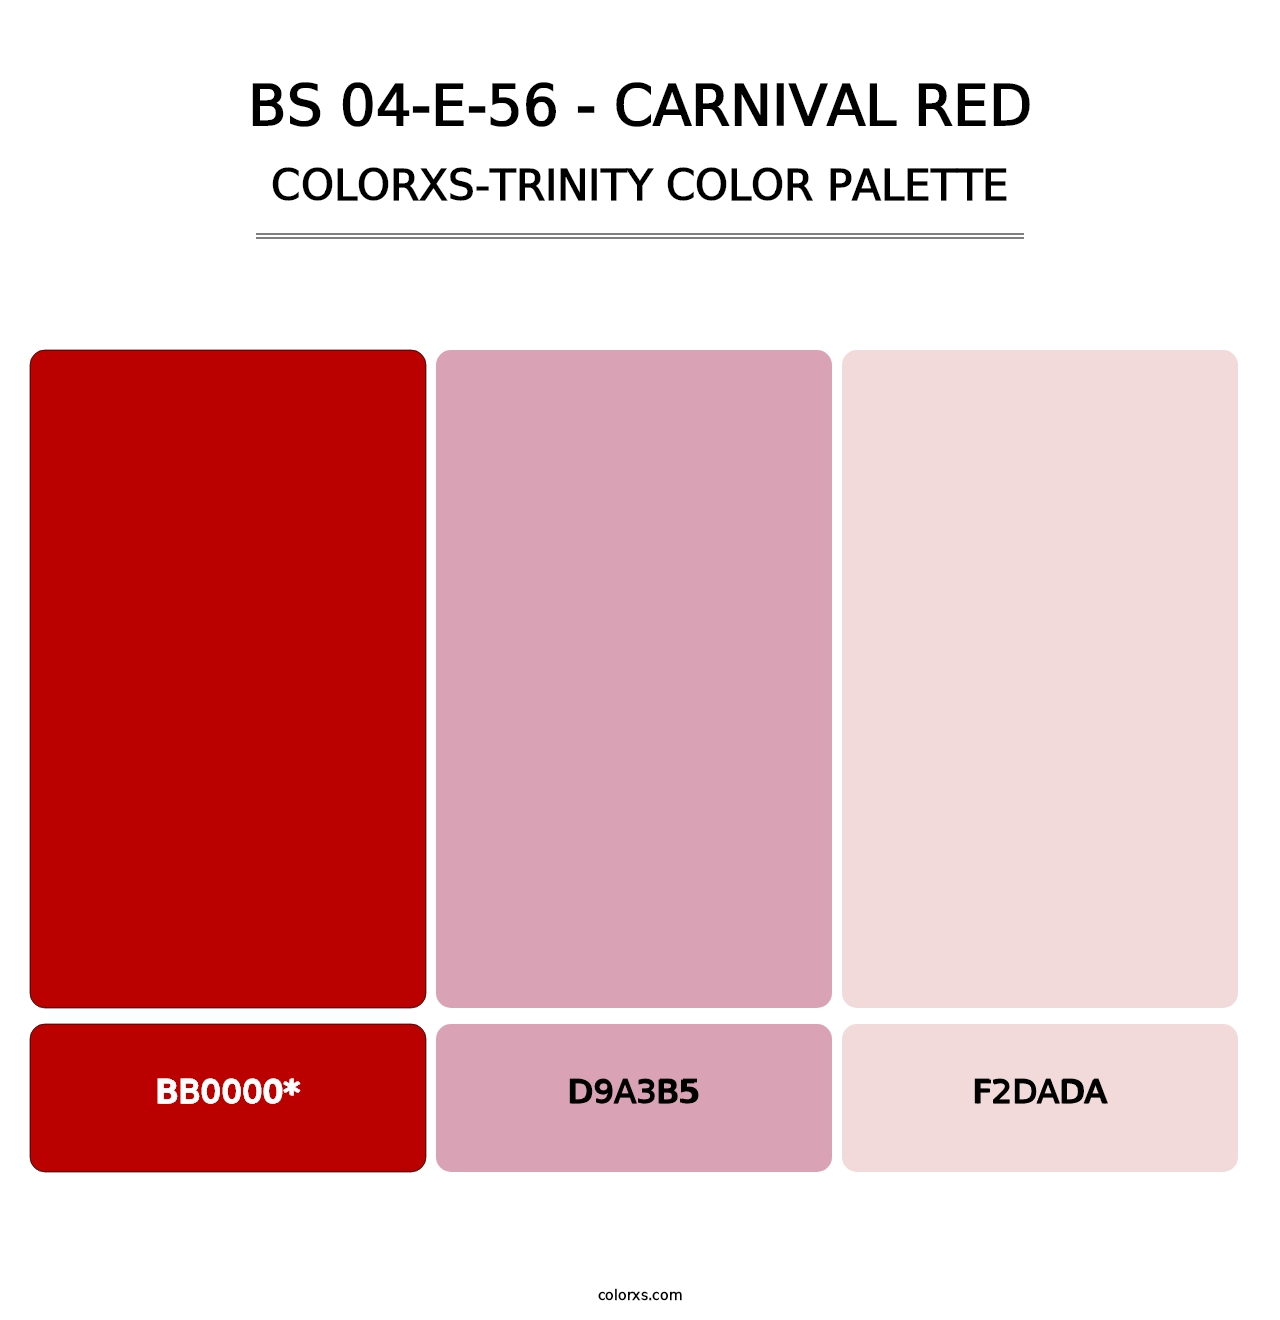 BS 04-E-56 - Carnival Red - Colorxs Trinity Palette